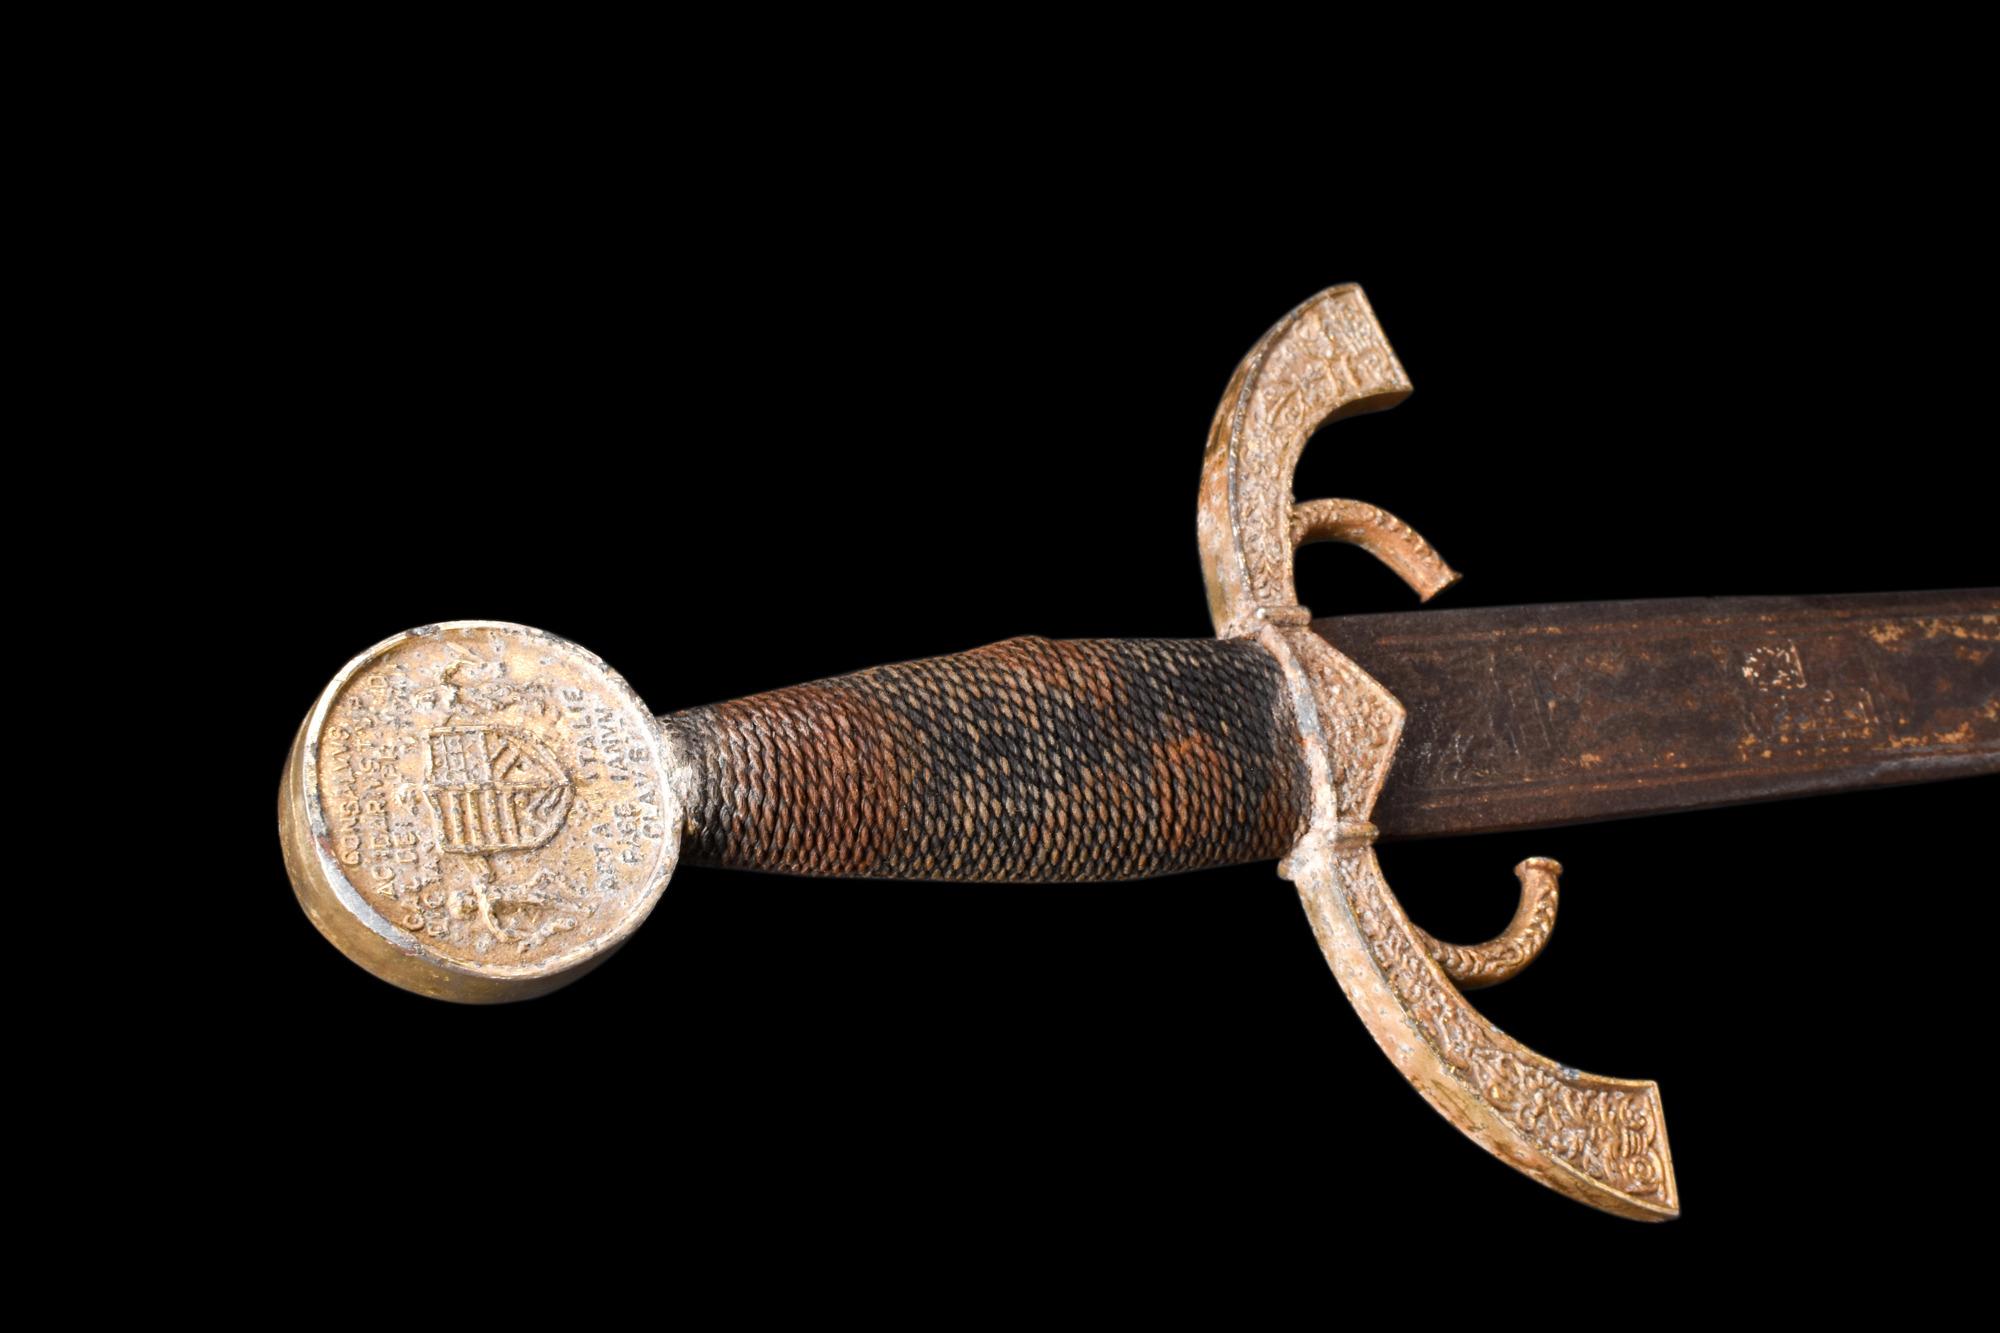 A SWORD IN 15TH CENTURY STYLE - Image 9 of 9